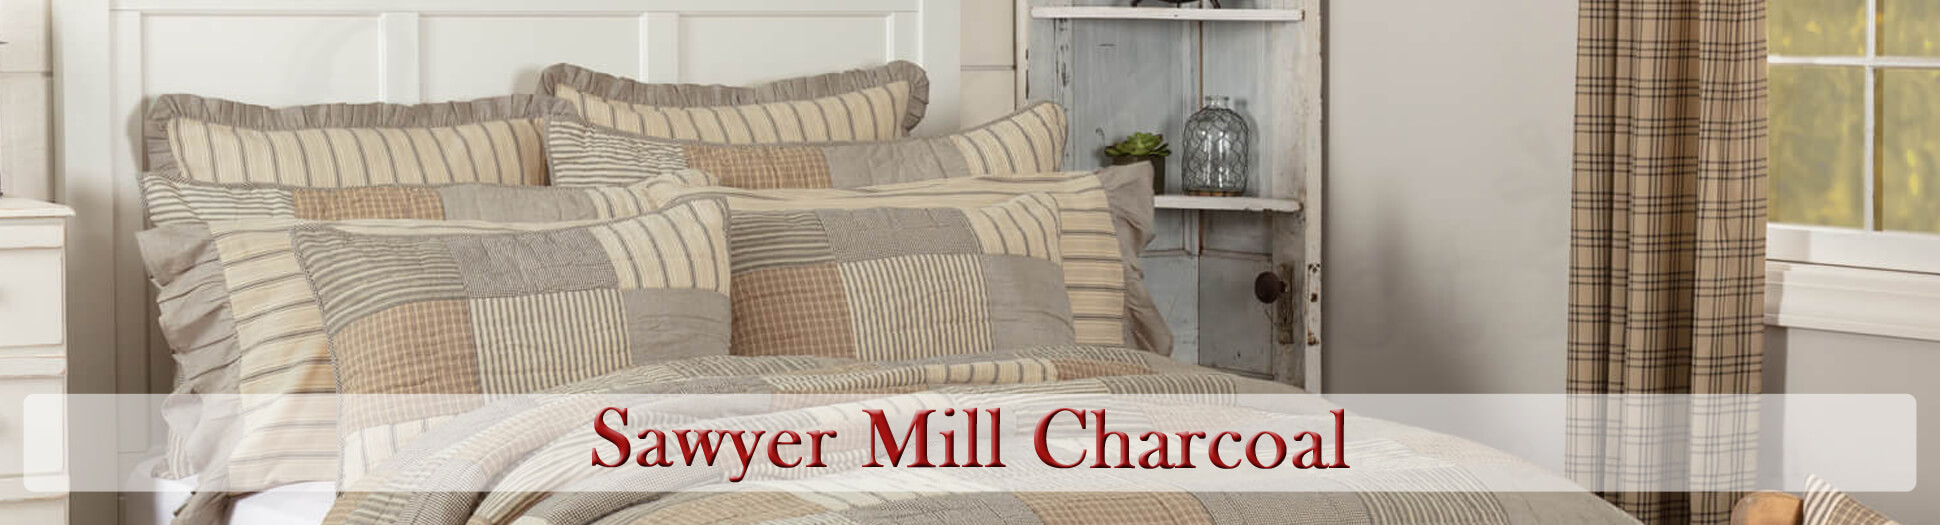 Shop Sawyer Mill Charcoal by VHC Brands